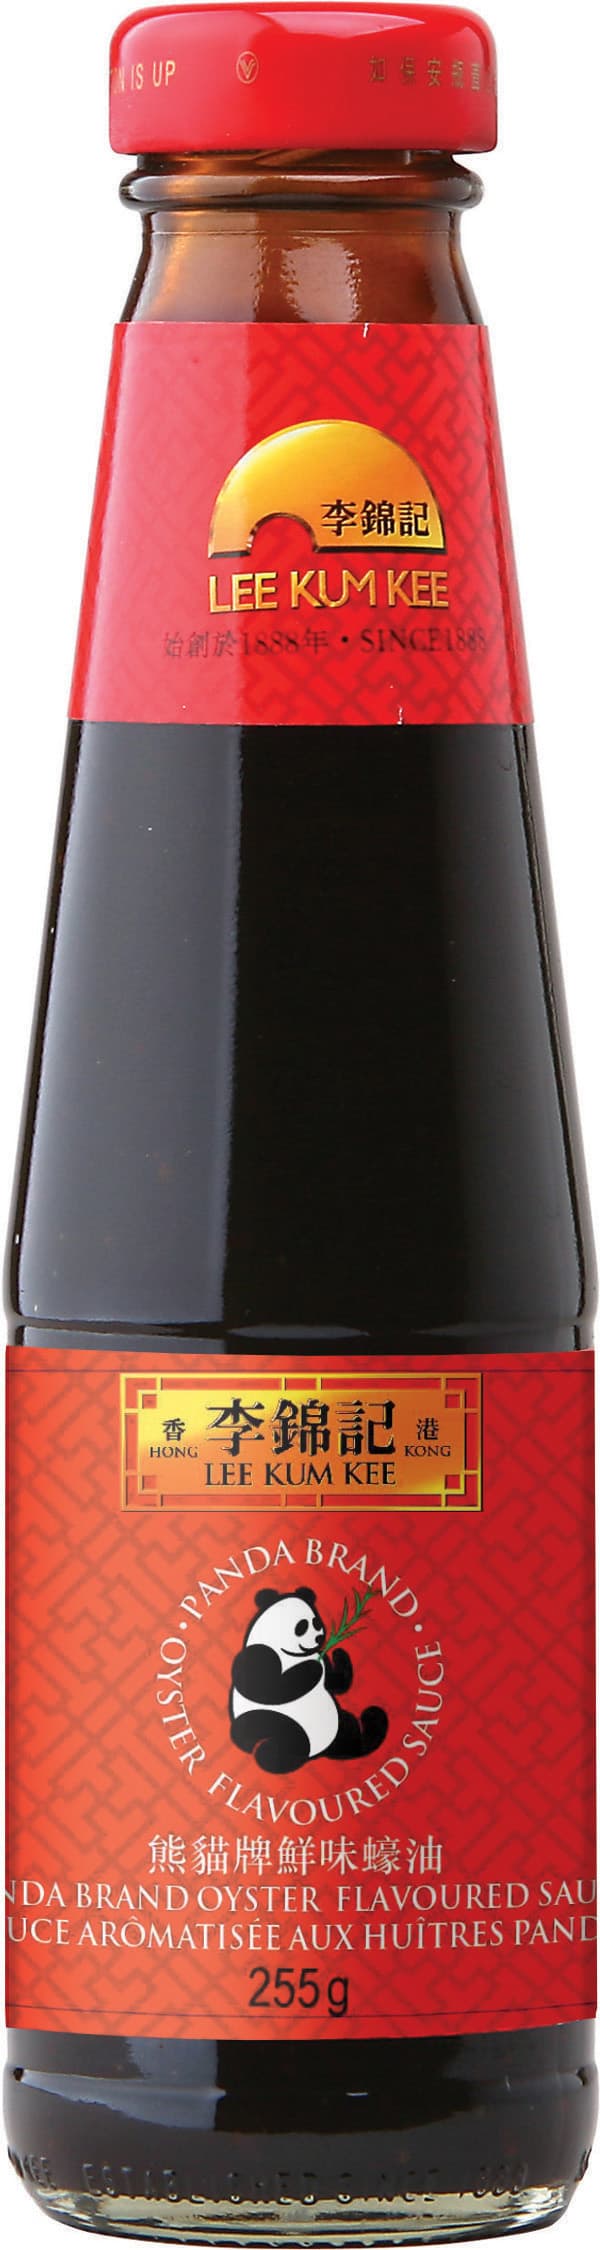 Panda Brand Oyster Flavoured Sauce 255g 